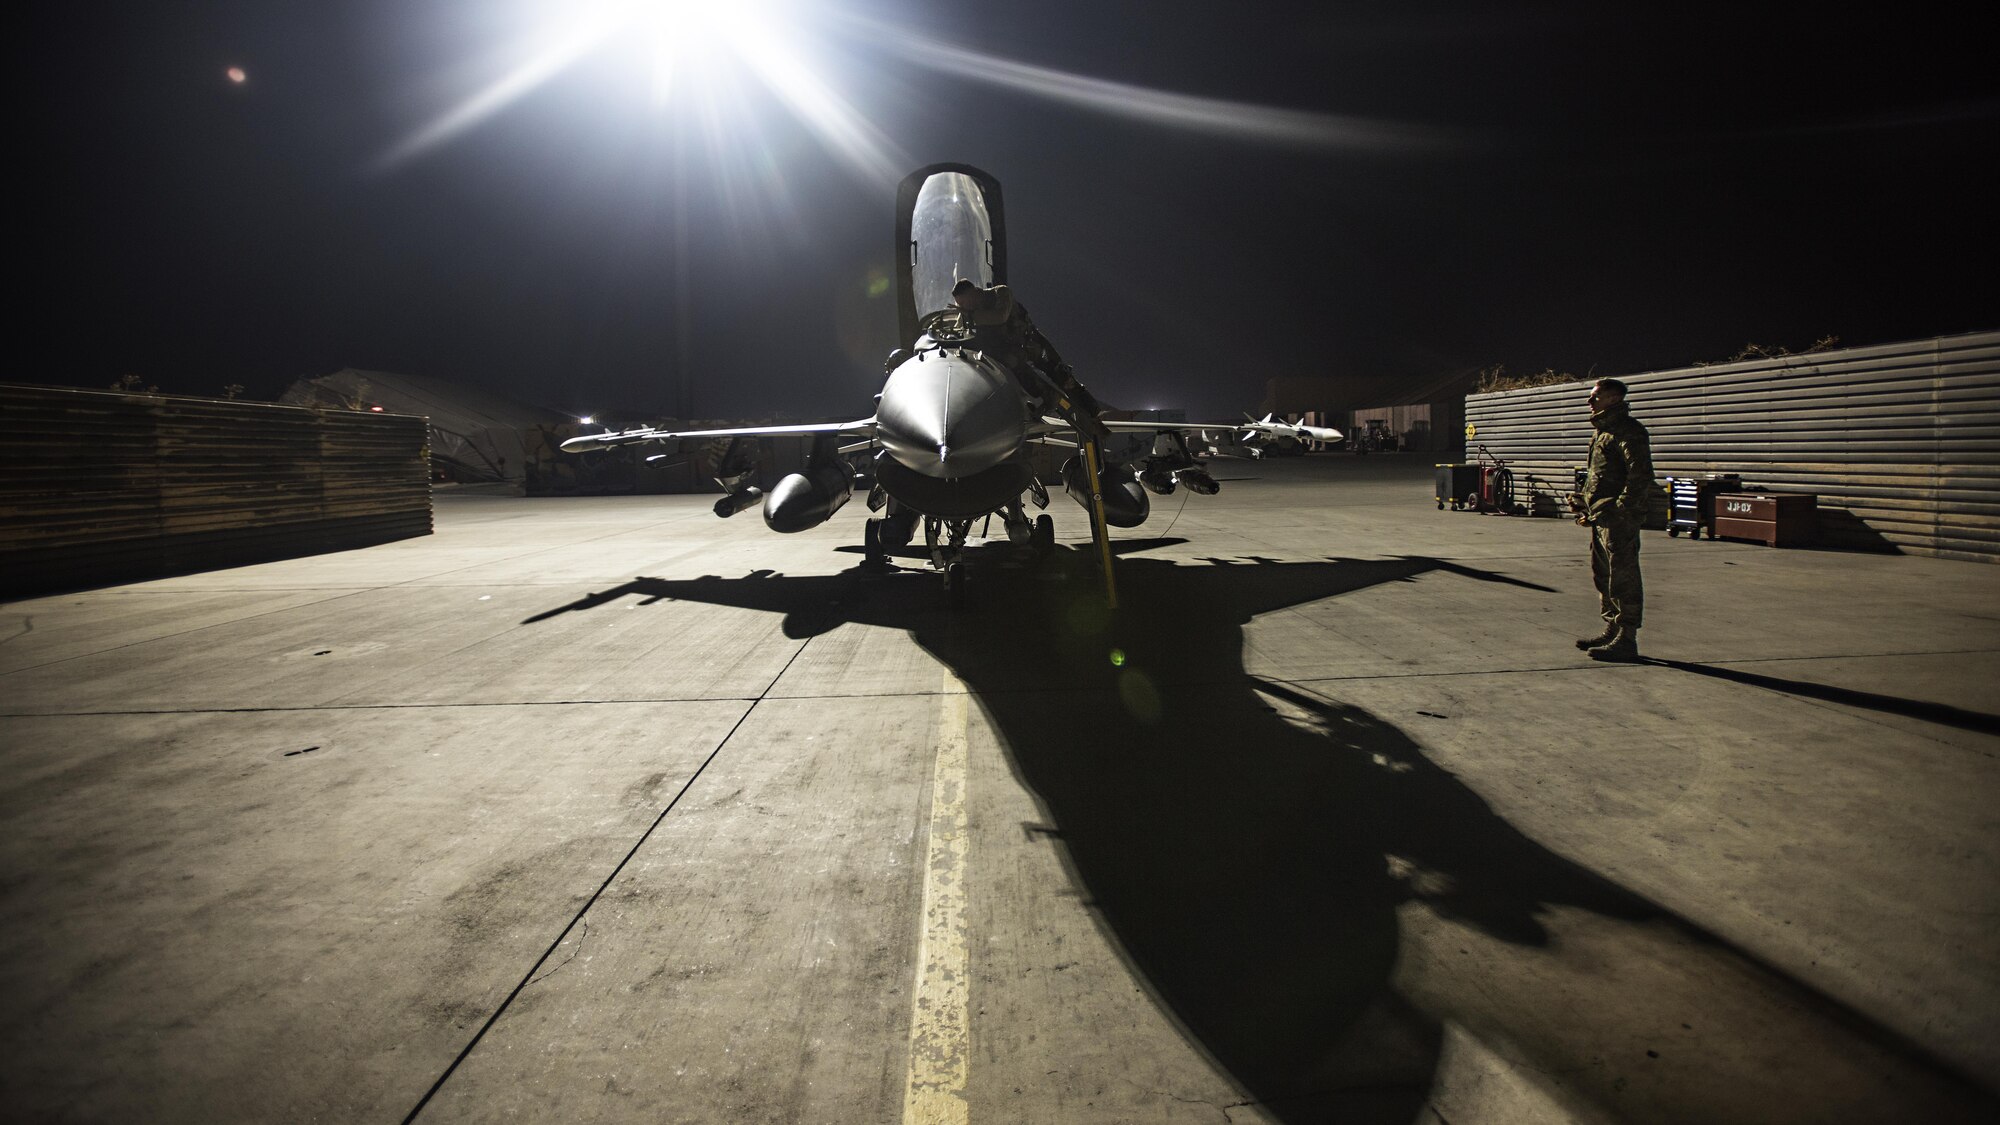 Capt. David, 79th Expeditionary Fighter Squadron pilot, and Staff Sgt. Daniel Lasal, 455th Expeditionary Aircraft Maintenance Squadron dedicated crew chief, prepare an F-16 Fighting Falcon for a night mission Jan. 13, 2017 at Bagram Airfield, Afghanistan. David served as an aircraft maintainer for eight years before commissioning as a pilot in 2012. (U.S. Air Force photo by Staff Sgt. Katherine Spessa)